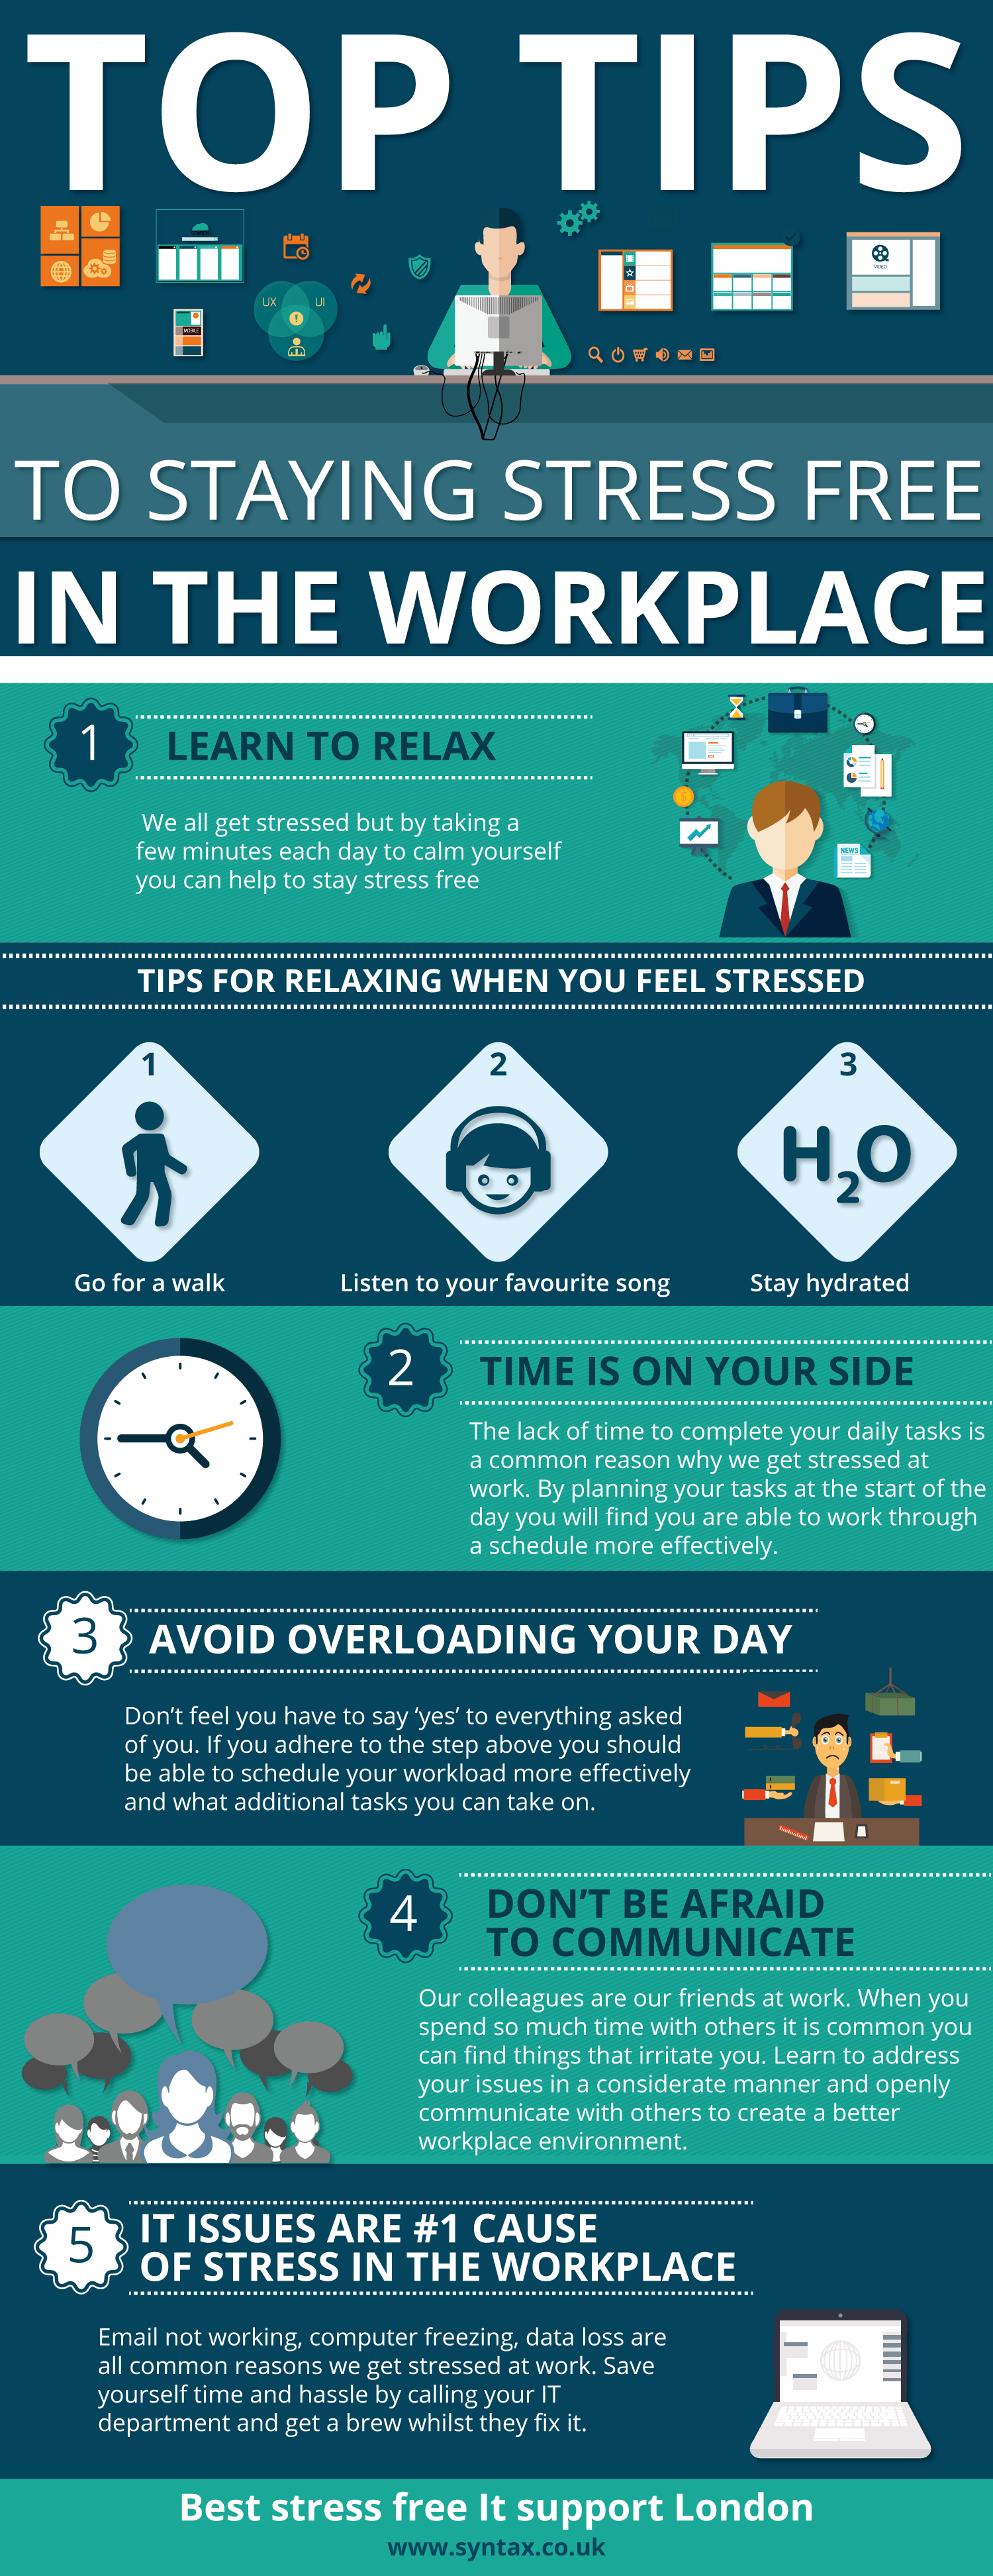 Top Tips To Staying Stress Free In The Workplace Infographic